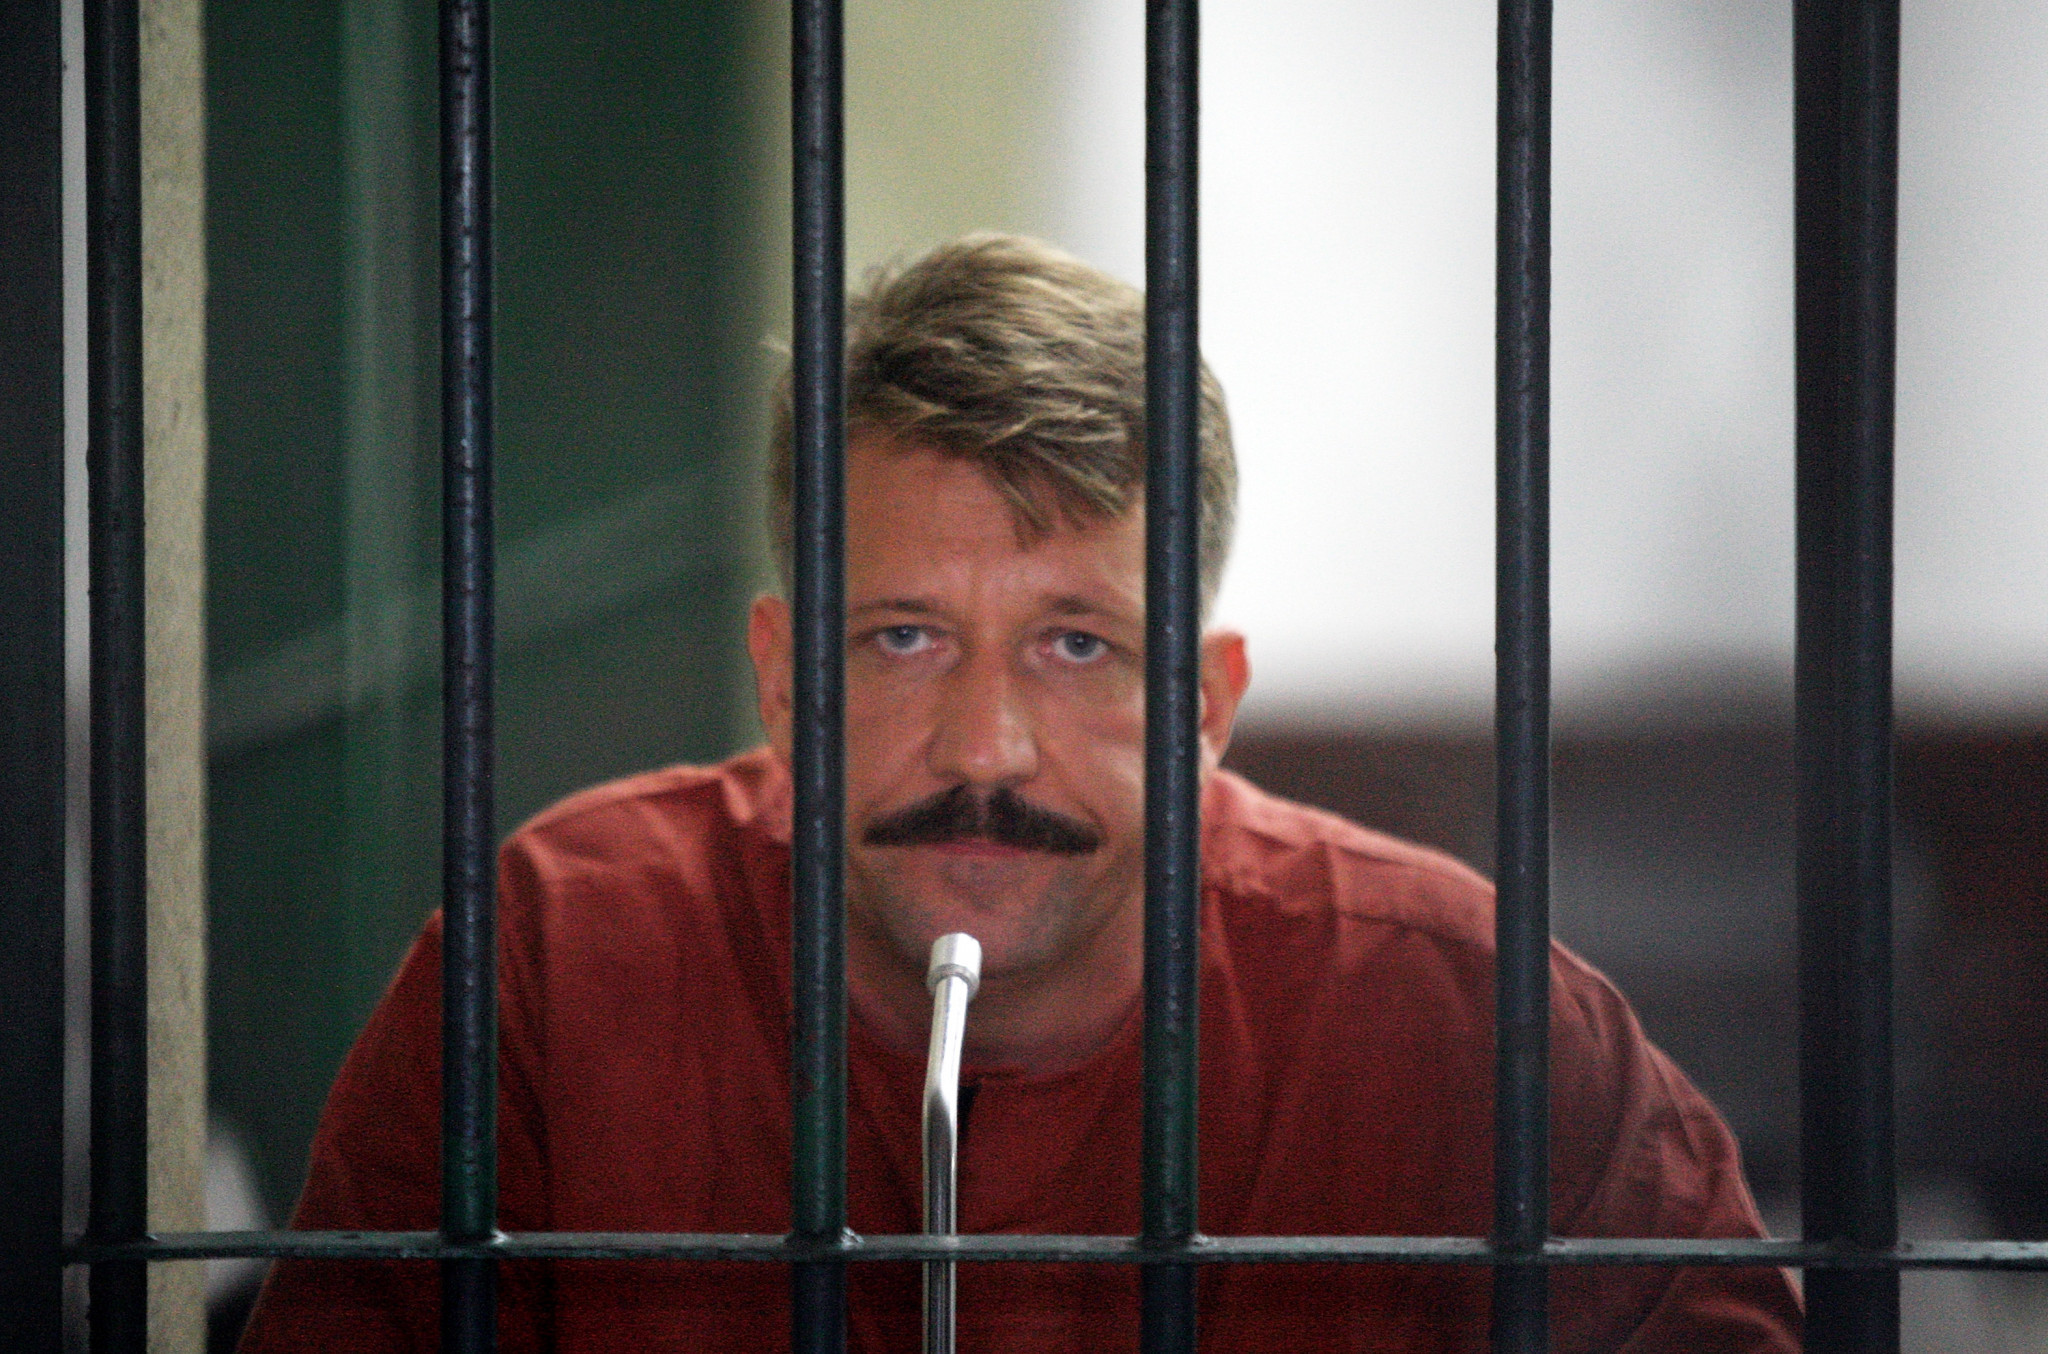 Russia's Deputy Foreign Minister has acknowledged the country wants to secure the repatriation of Viktor Bout ©Getty Images